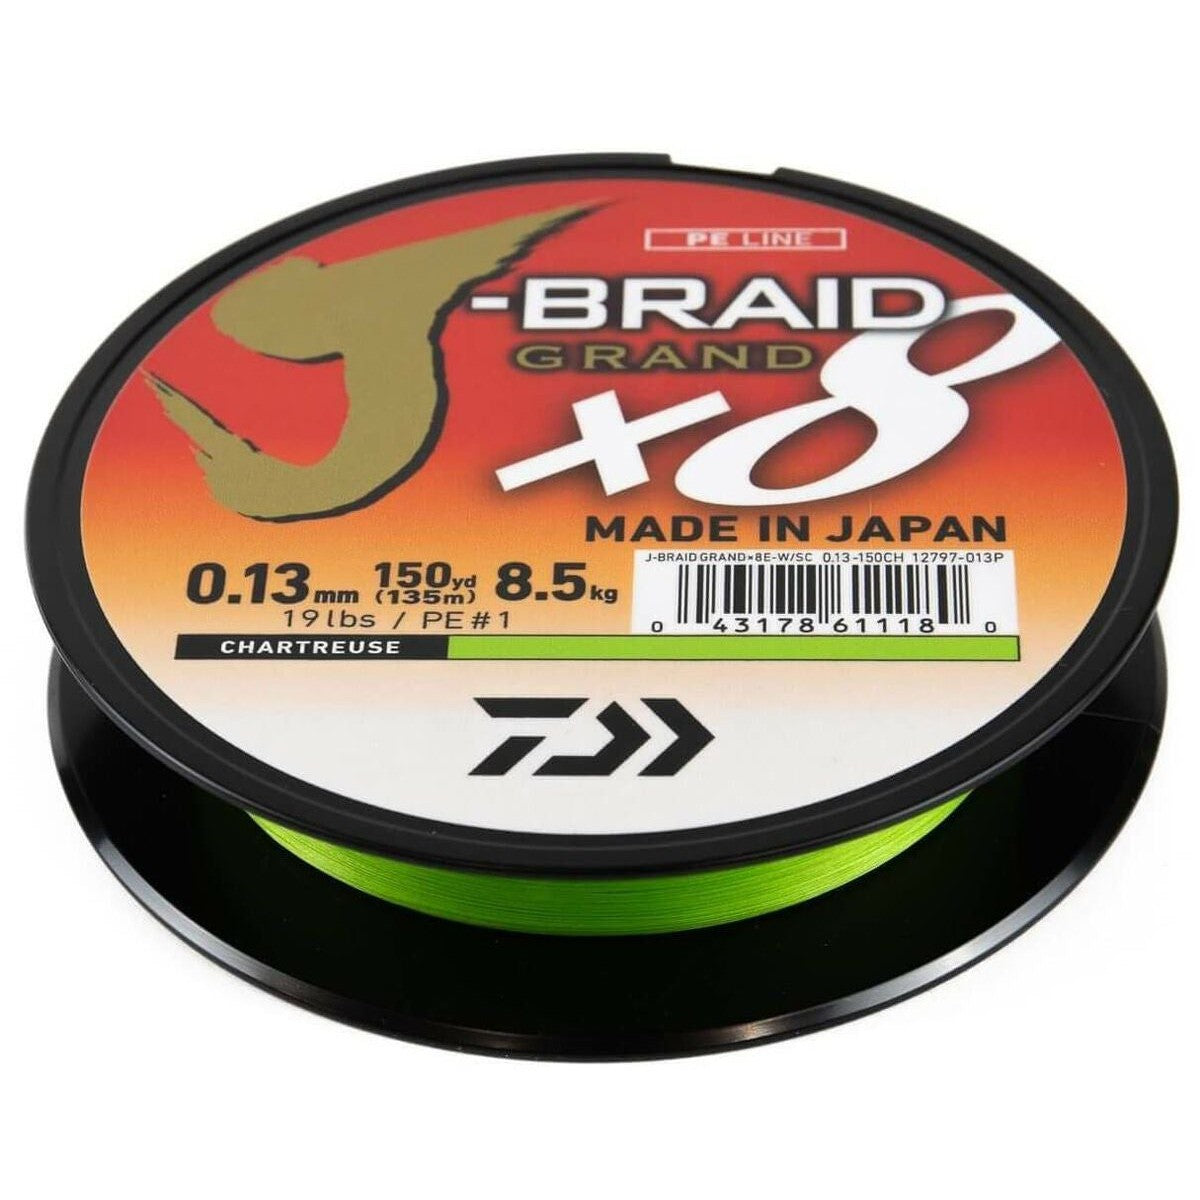 Buy Braided Line Products Online in Jerusalem at Best Prices on